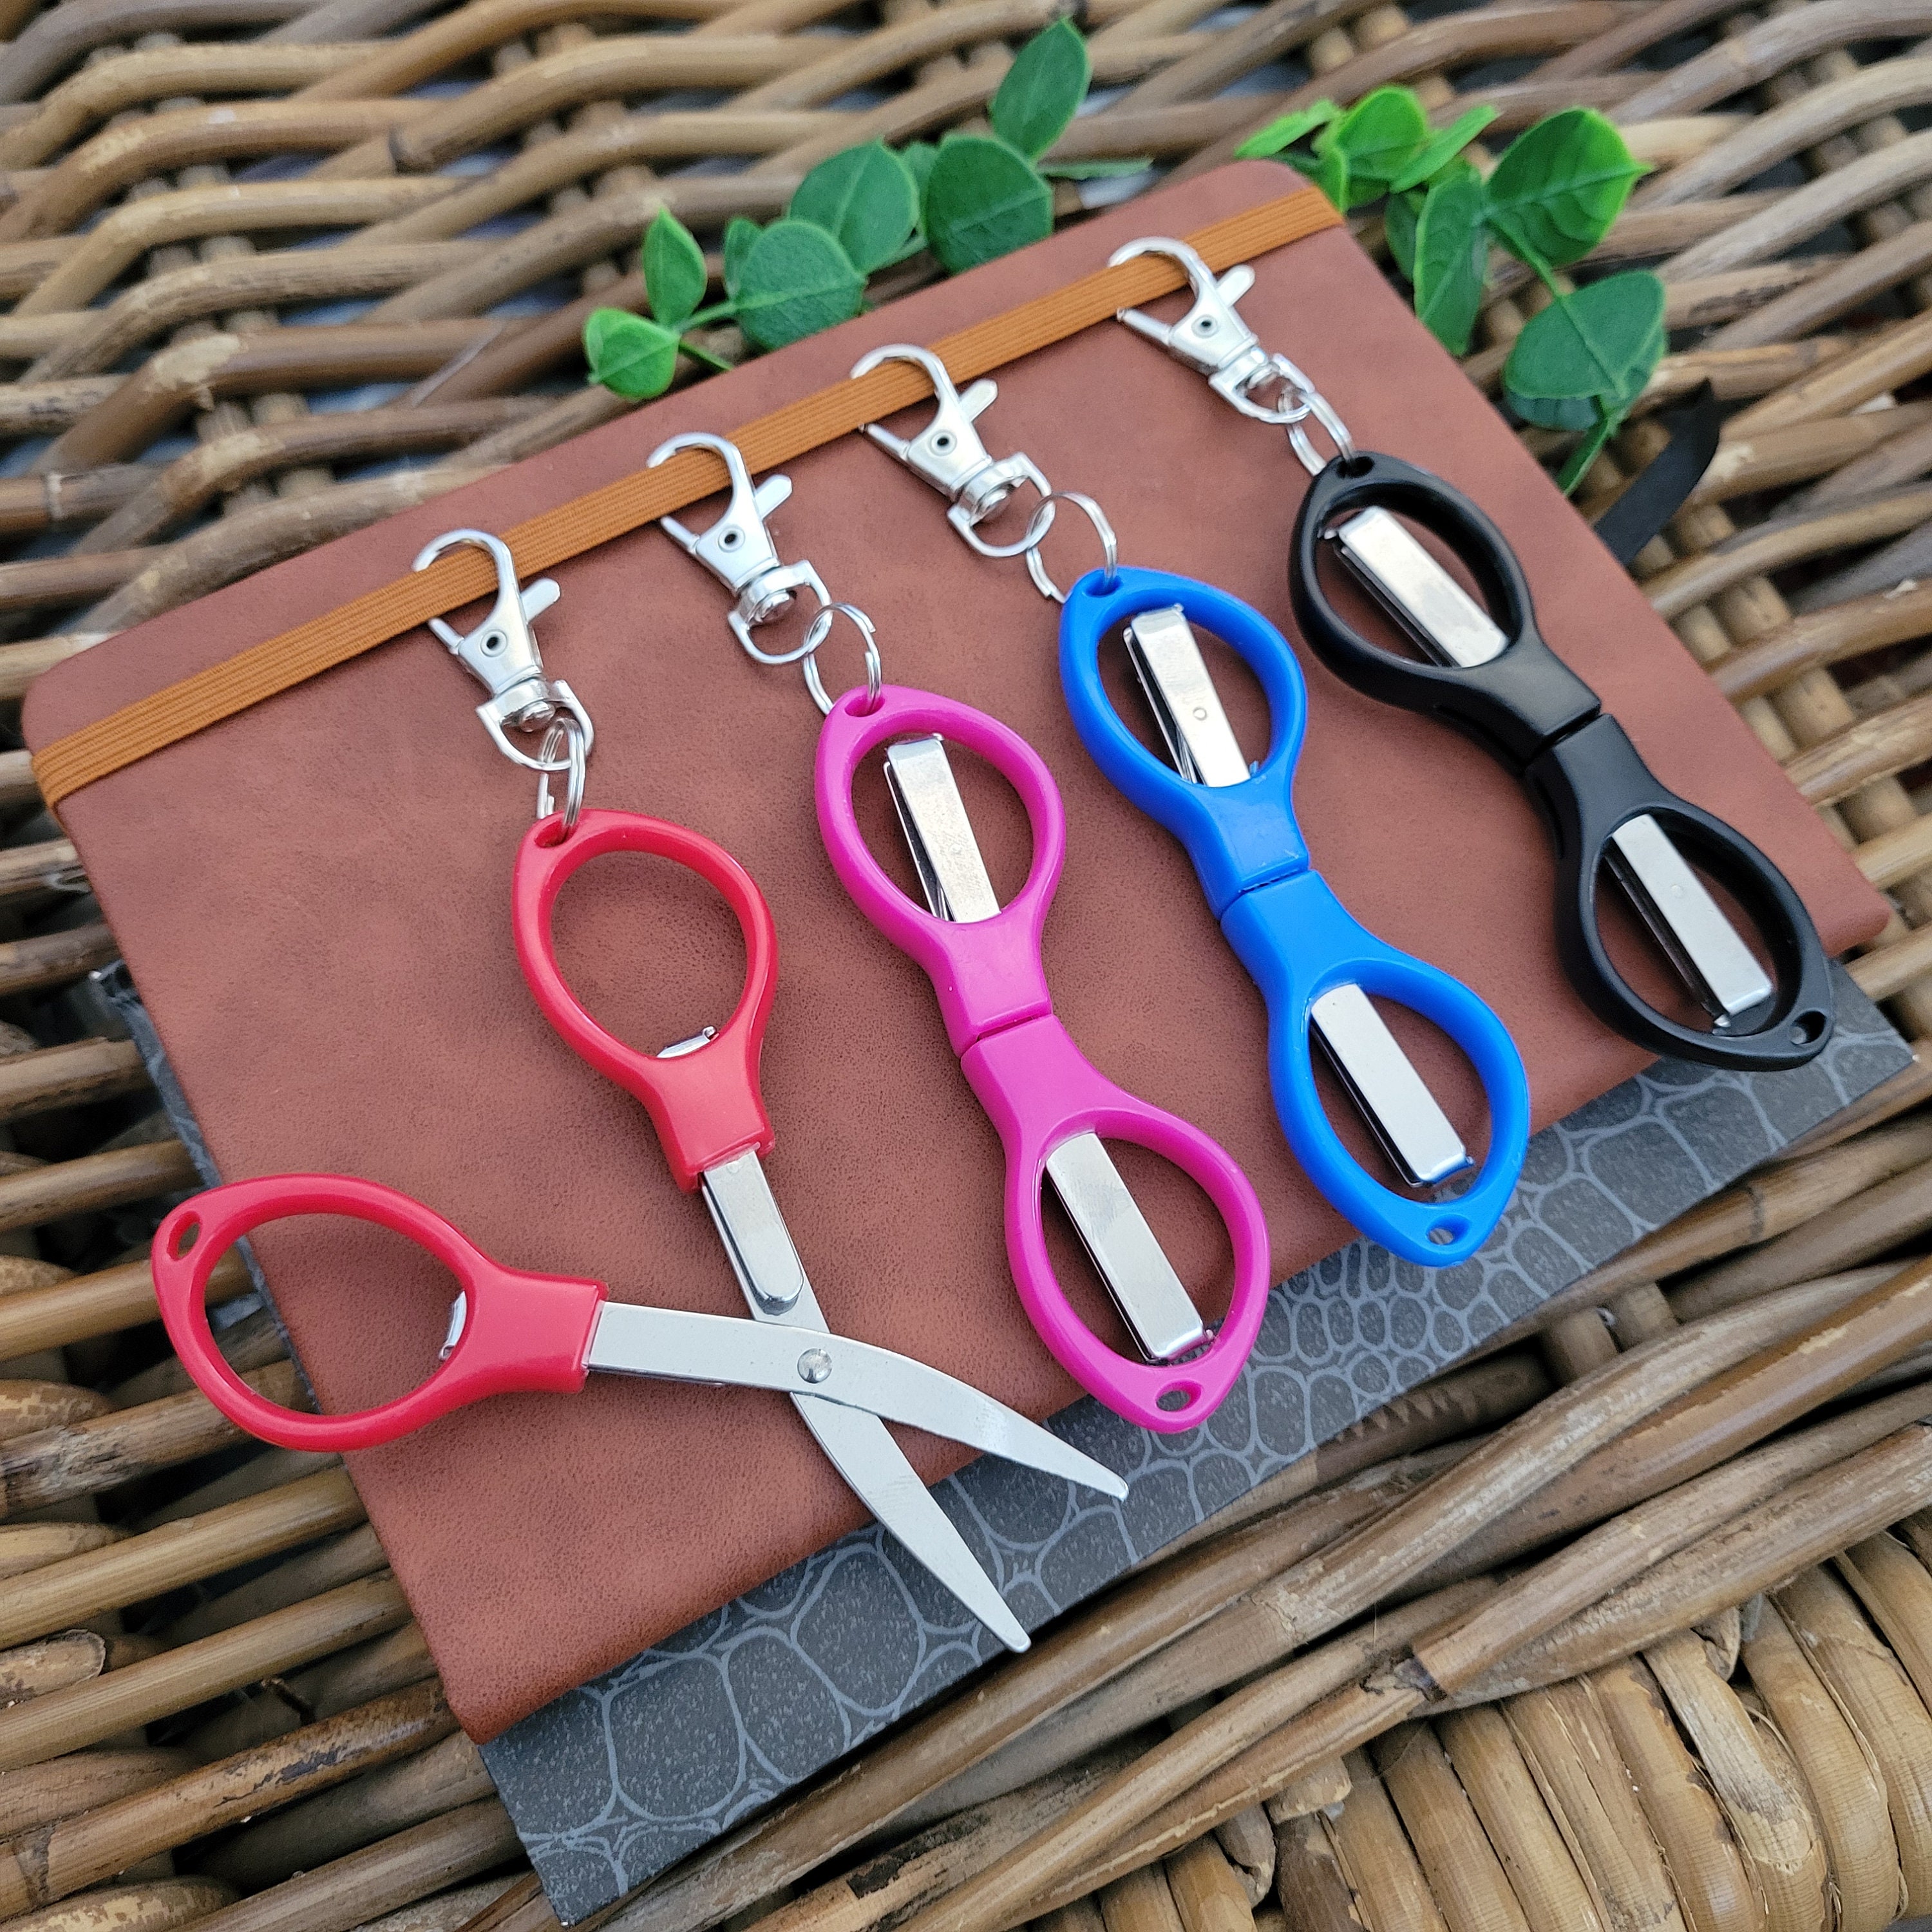 Mini Folding Scissors with Clip, Clip on Folding Scissors, Badge Reel Scissors, Badge Reel Accessories, Clip on Scissors for Backpack